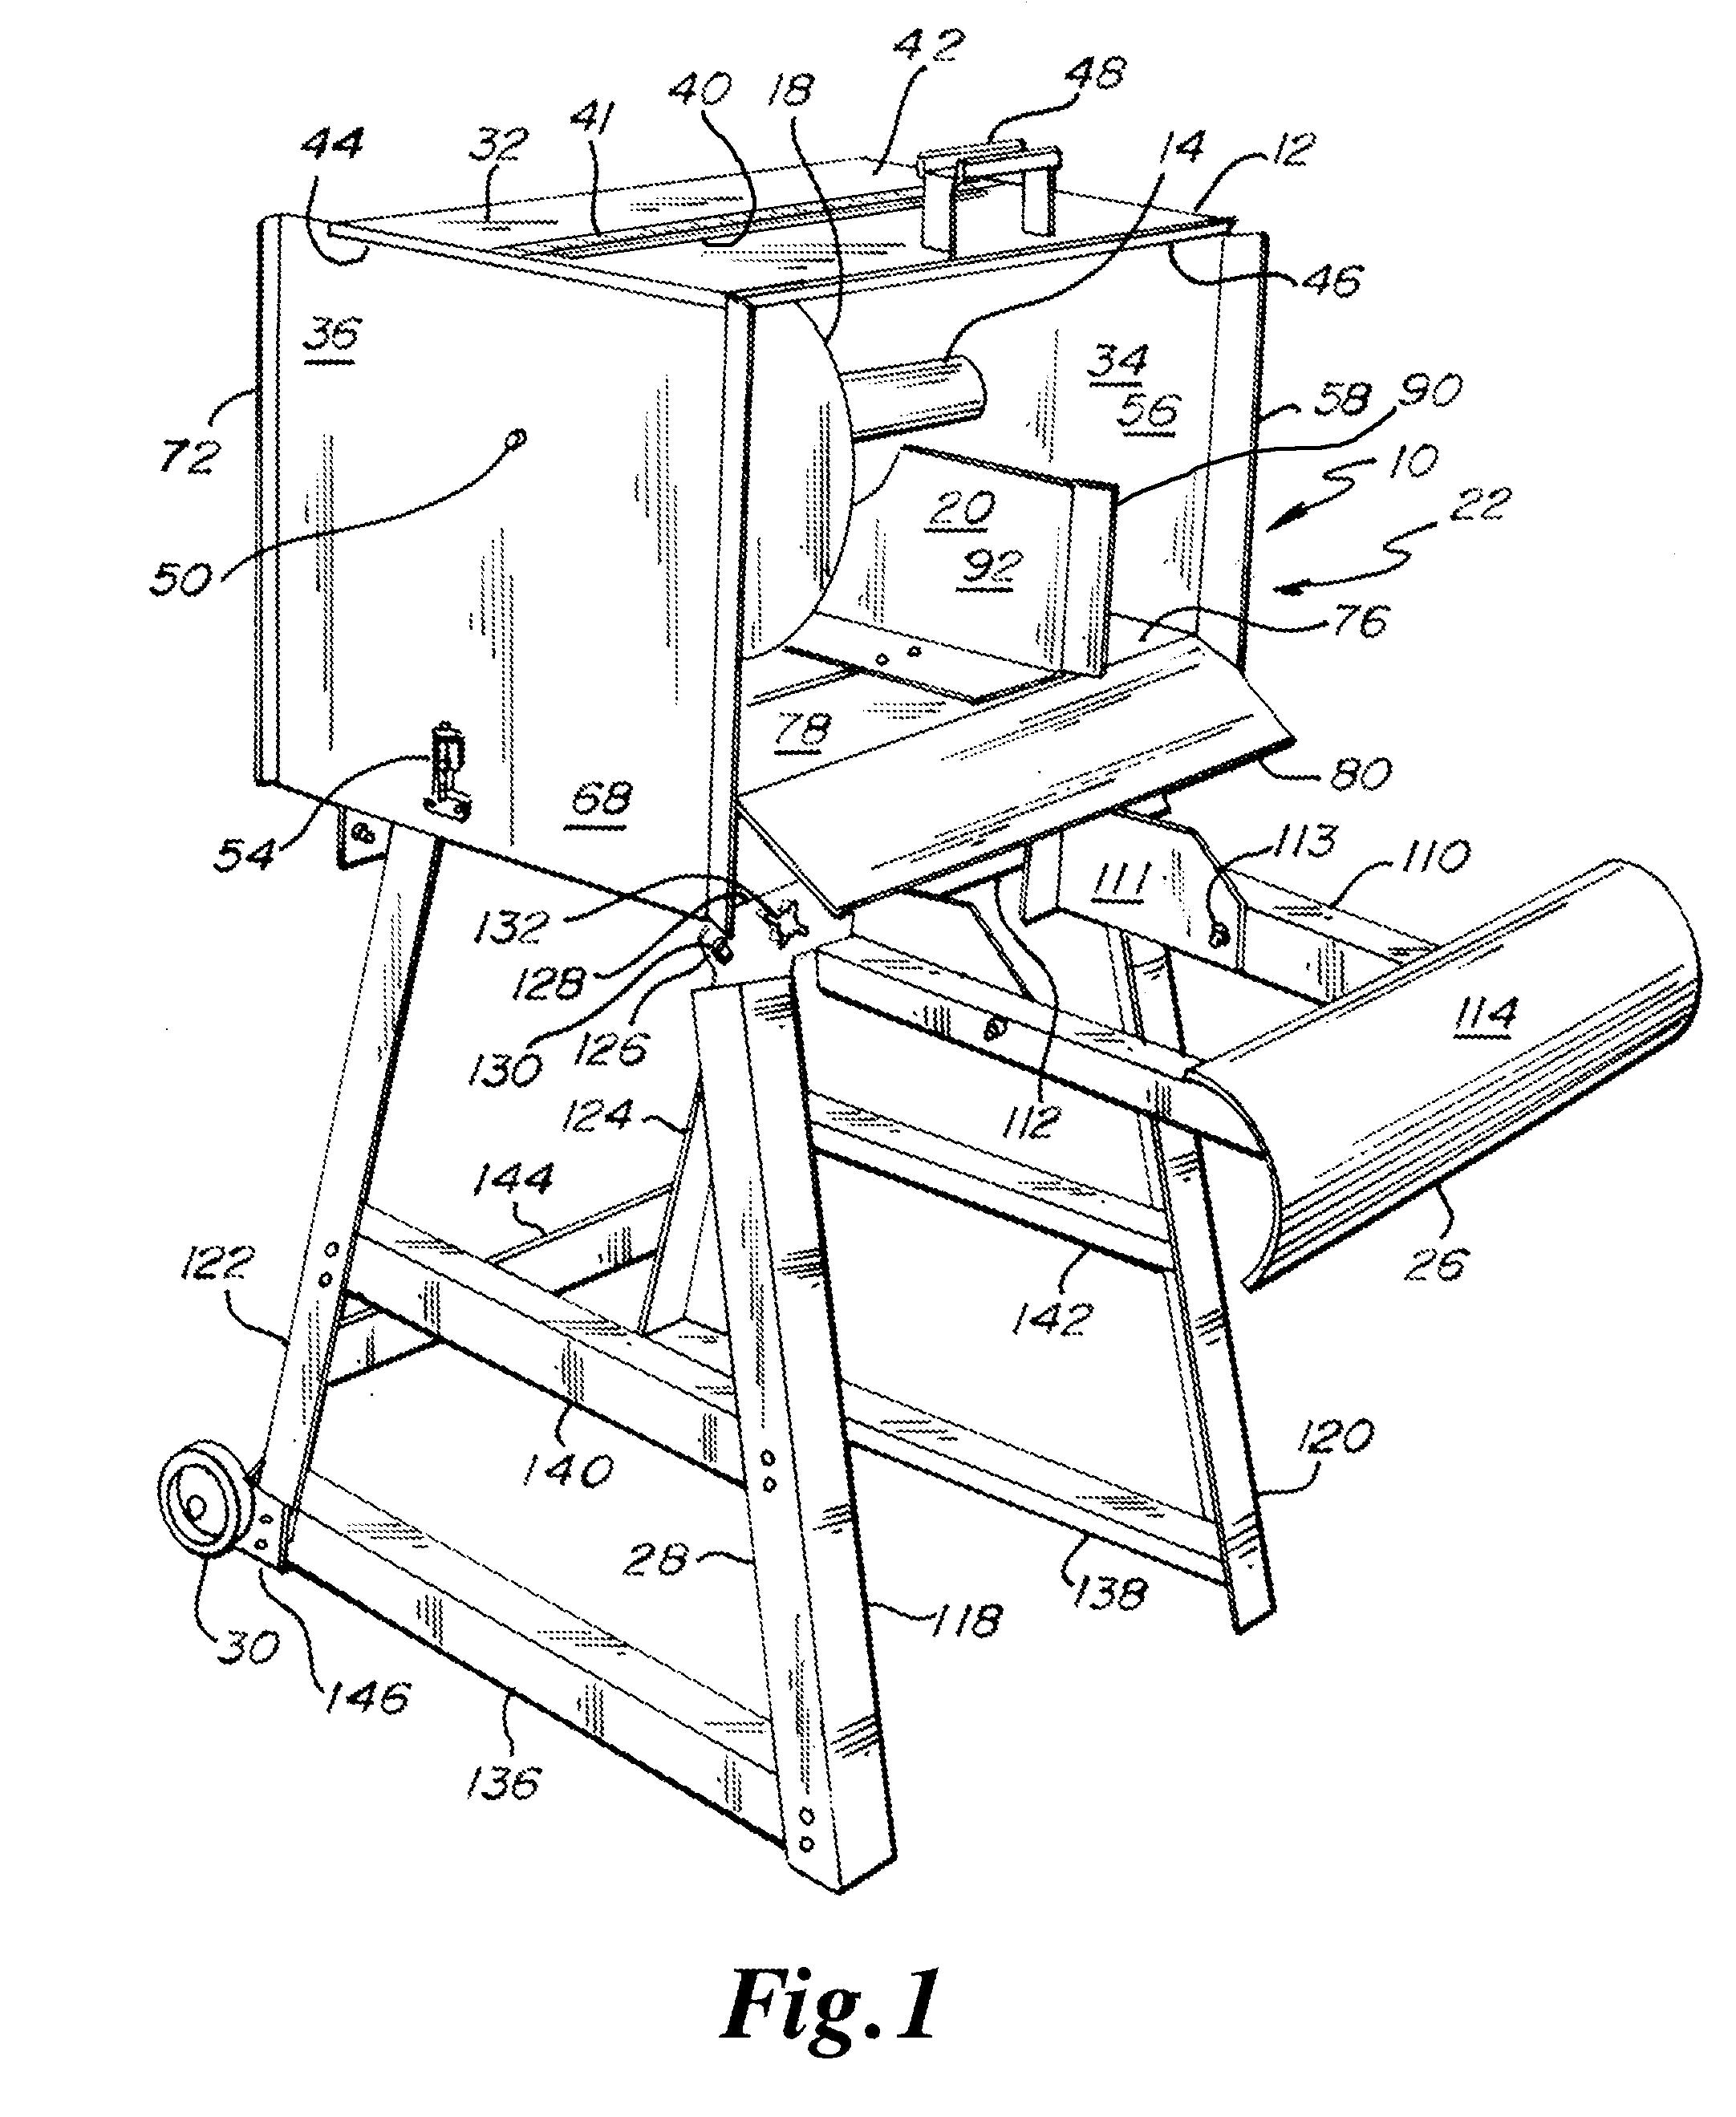 Push/Pull Rotary Cutting Apparatus Driven By Substrate